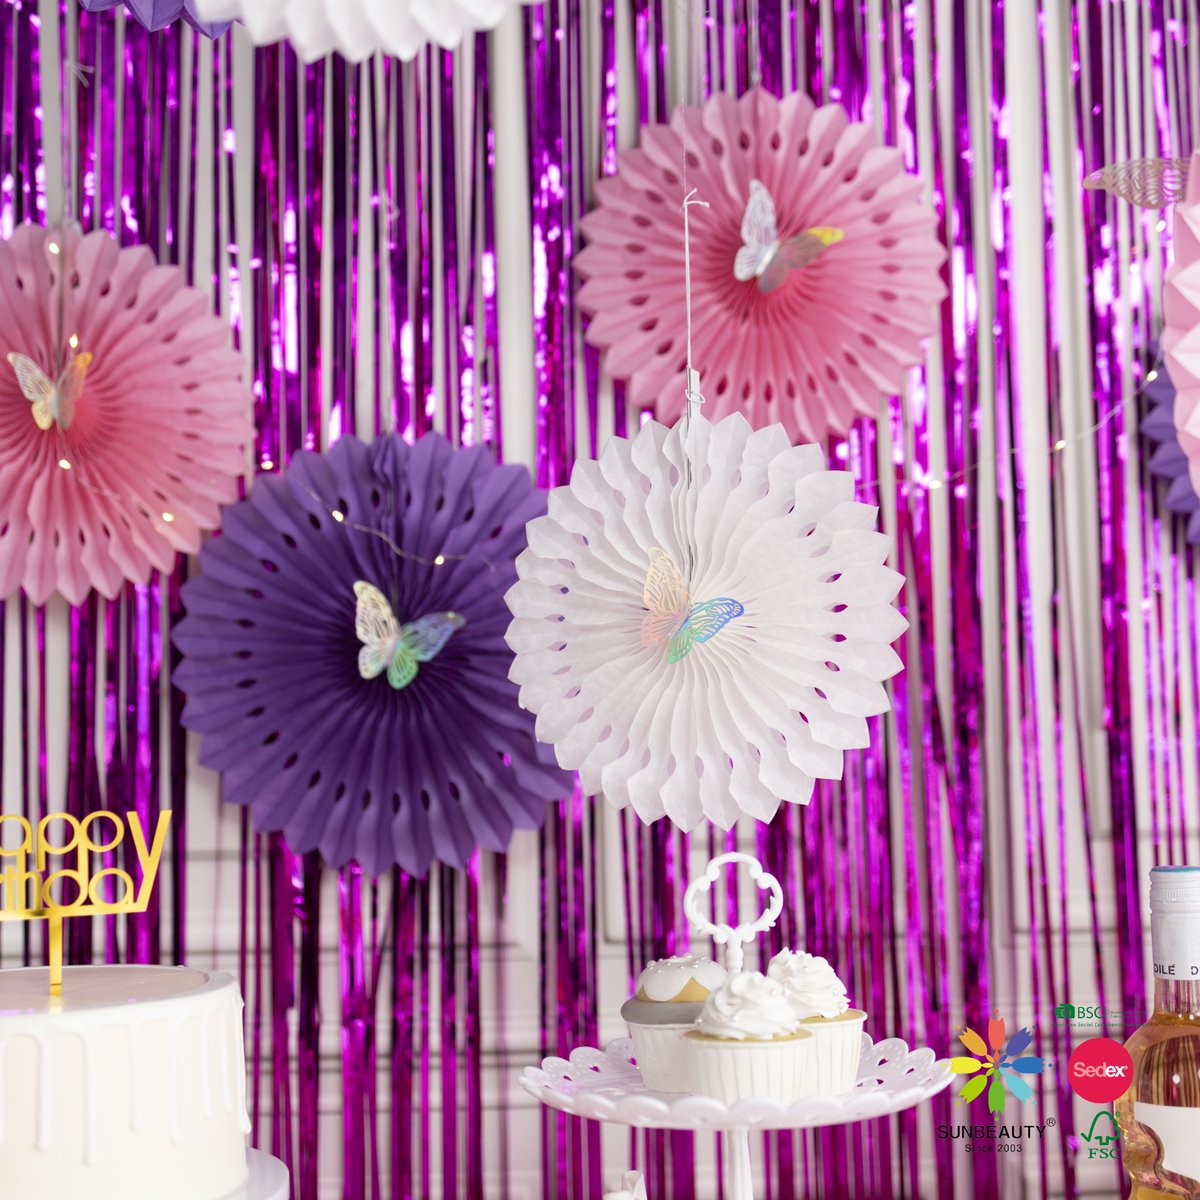 💜✨ Create a whimsical wonderland with our paper fans, foil curtains, and butterfly wall stickers that will transport you to a blooming garden paradise. 🌷 sunbeauty.com/occasions/seas…